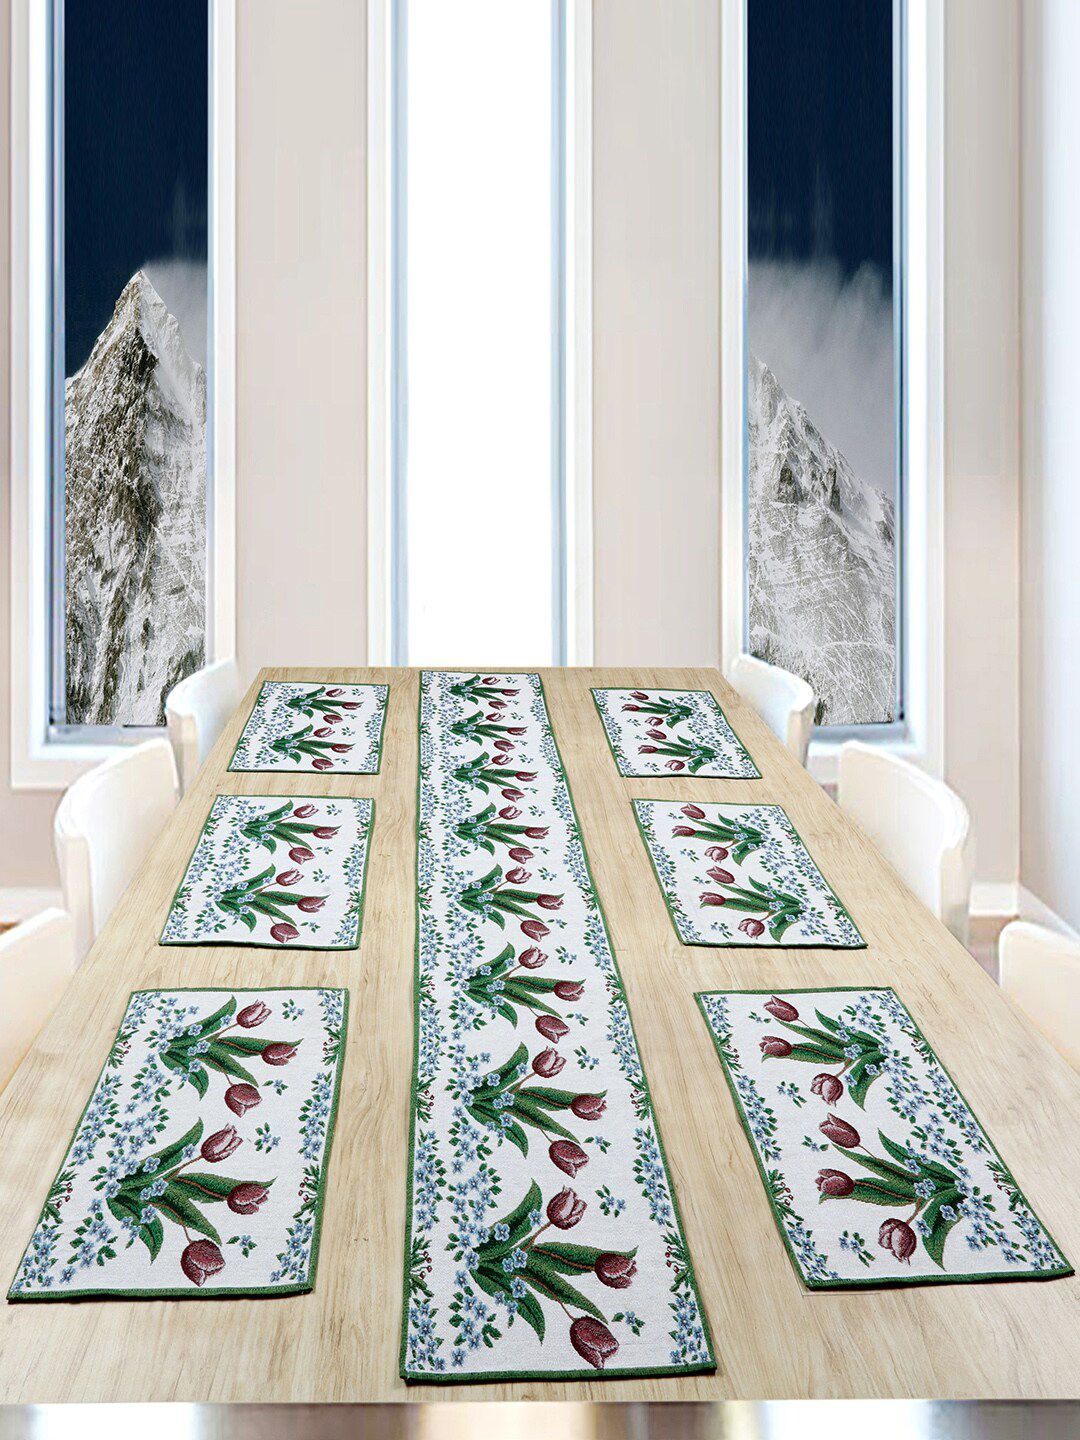 BELLA TRUE Set Of 6 White & Green Rose Printed Jacquard Table Placemats With Runner Price in India